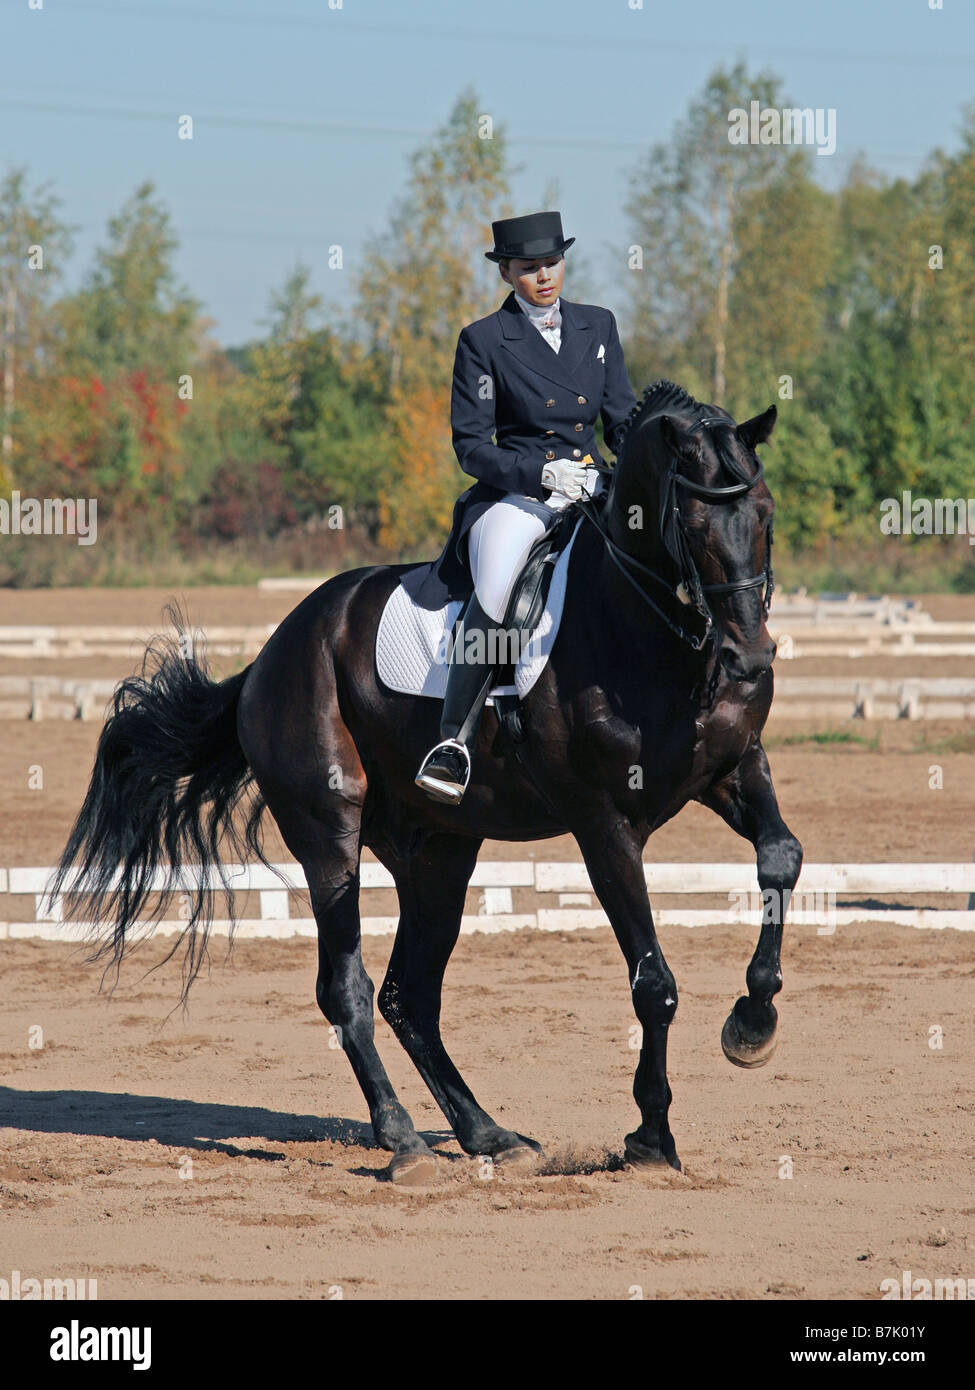 Sport Sports Female Dressage Rider and Rearing Horse in Arena Stock Photo